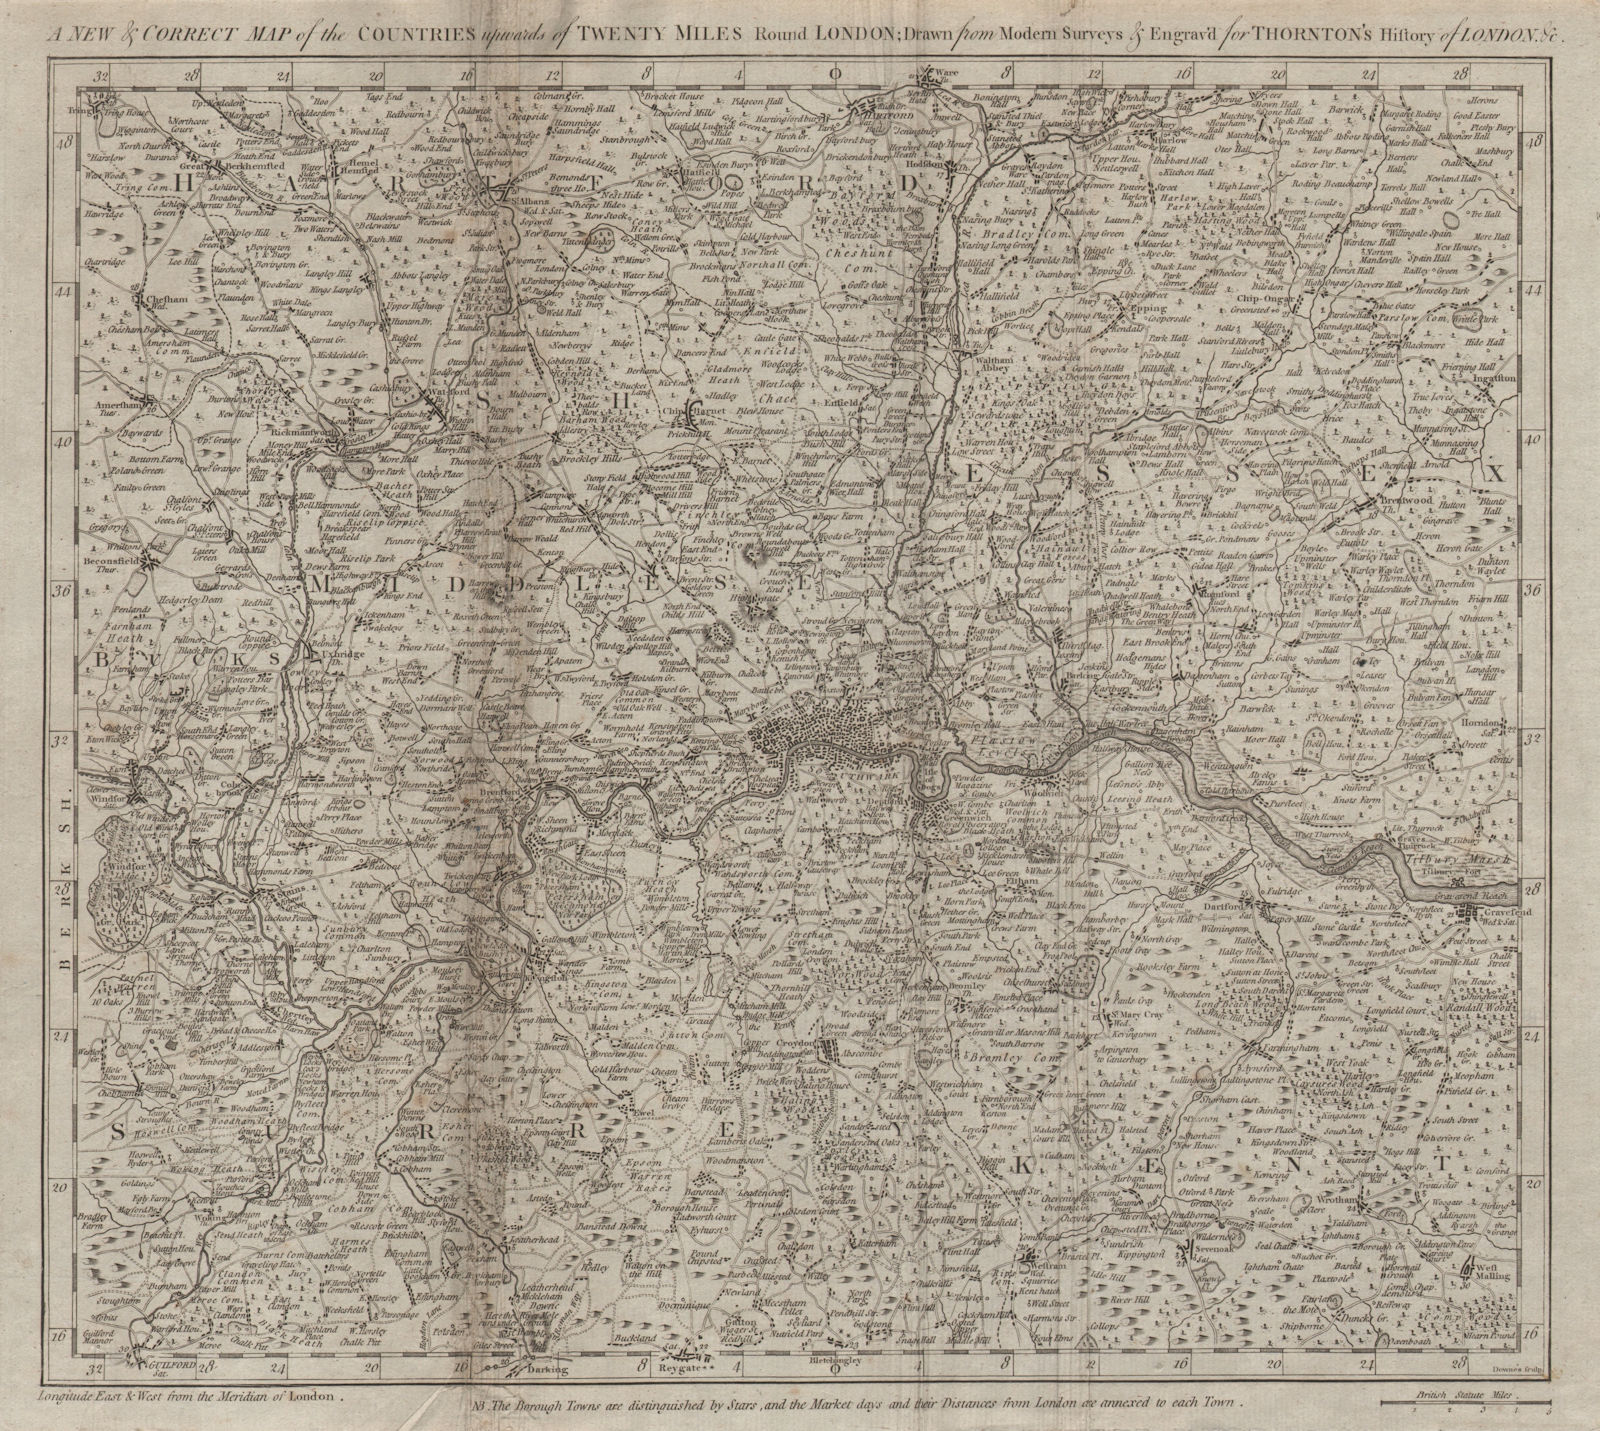 Associate Product A new and correct map of the countries… 20 miles round London. THORNTON 1784